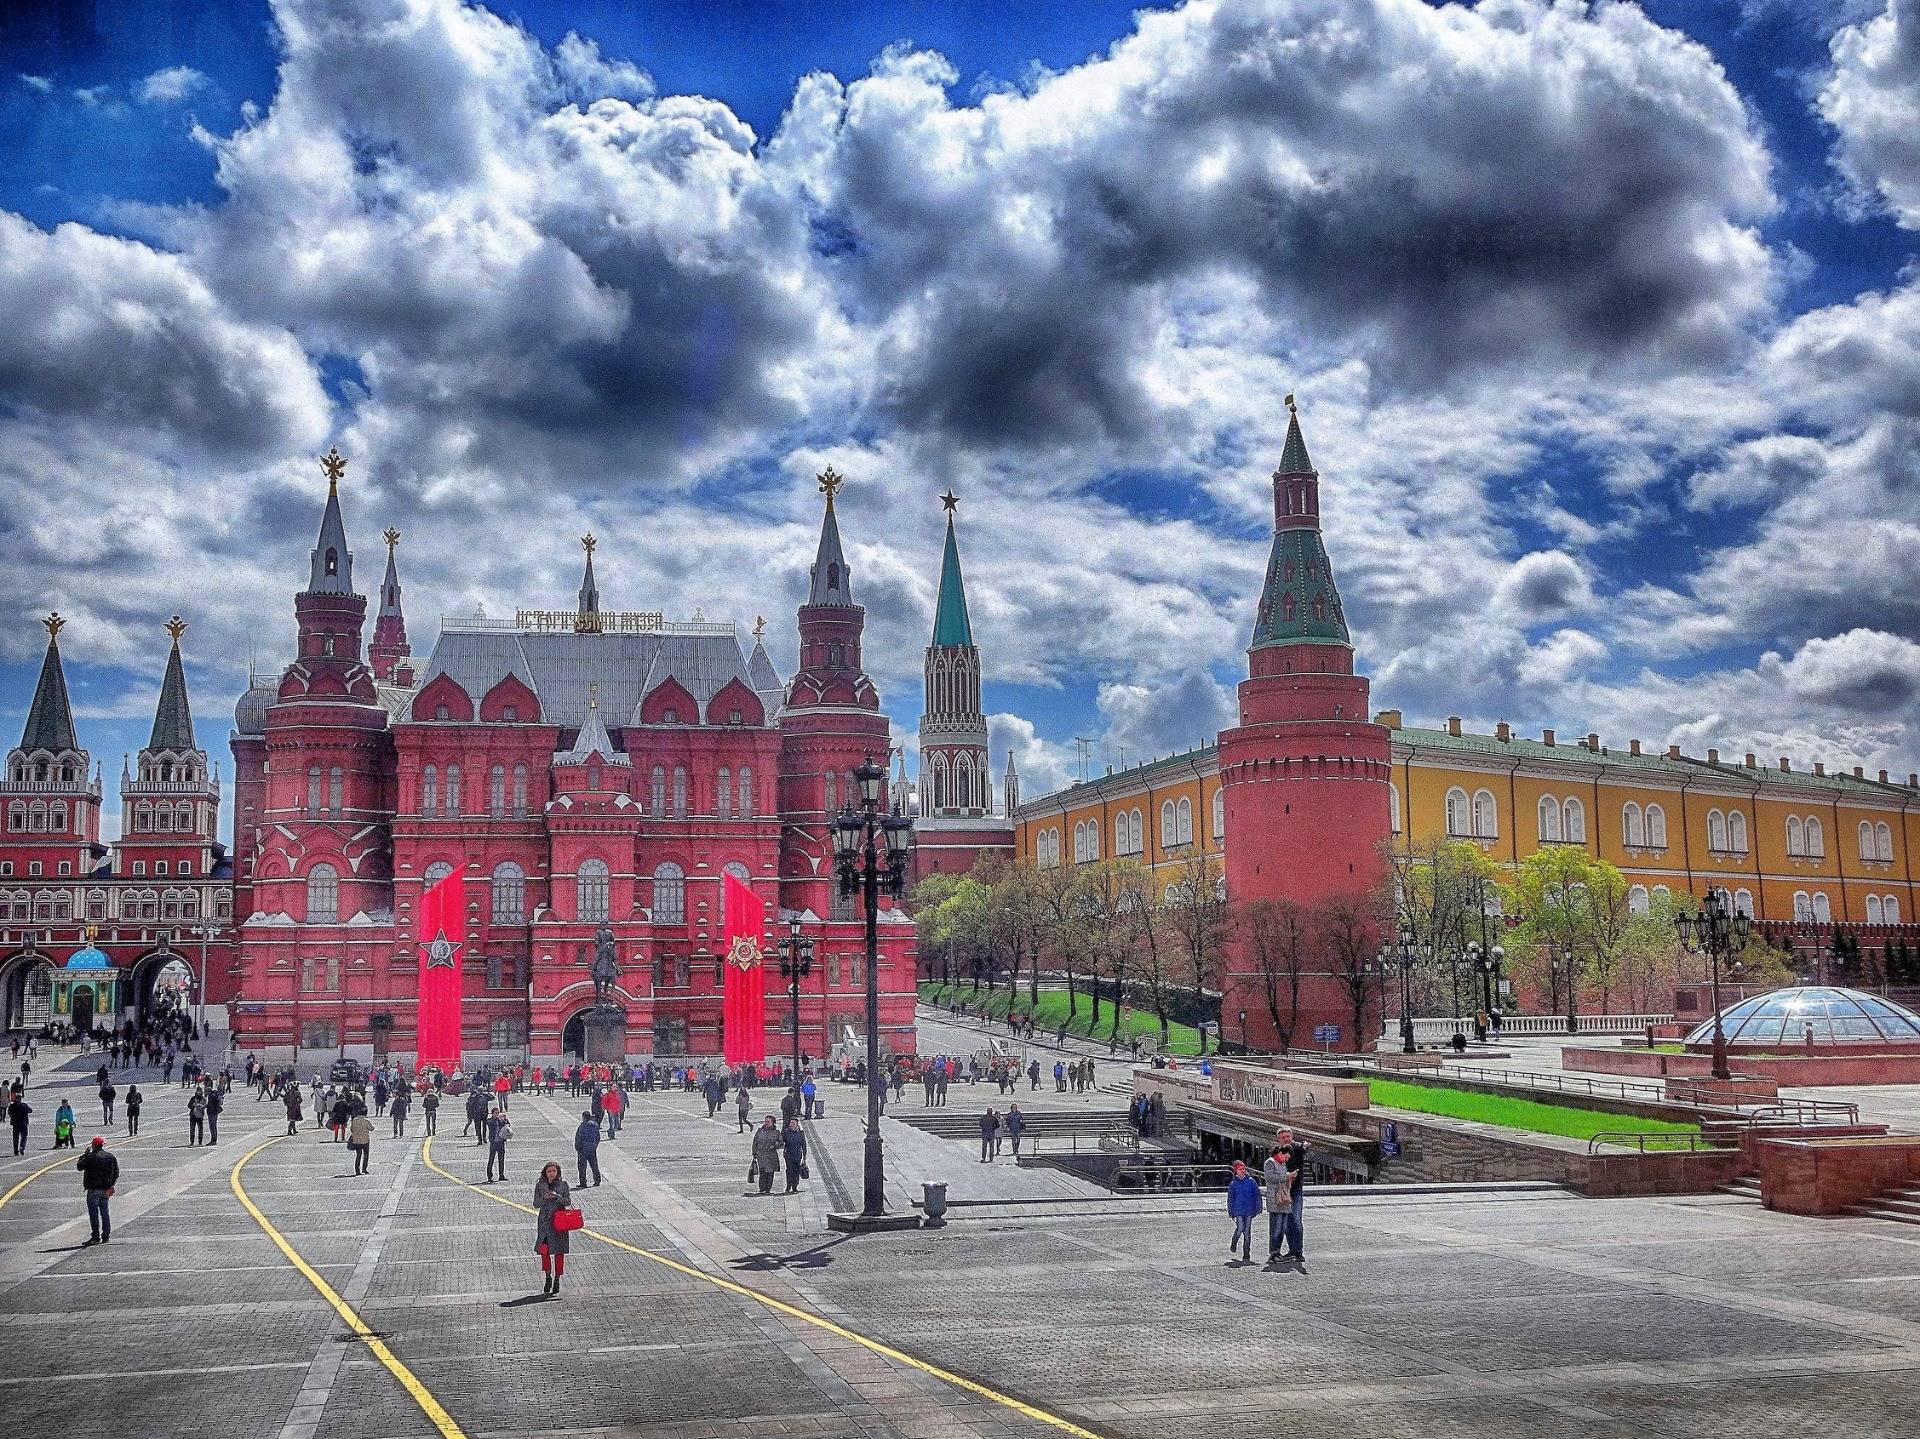 On the right hand side: The Kremlin